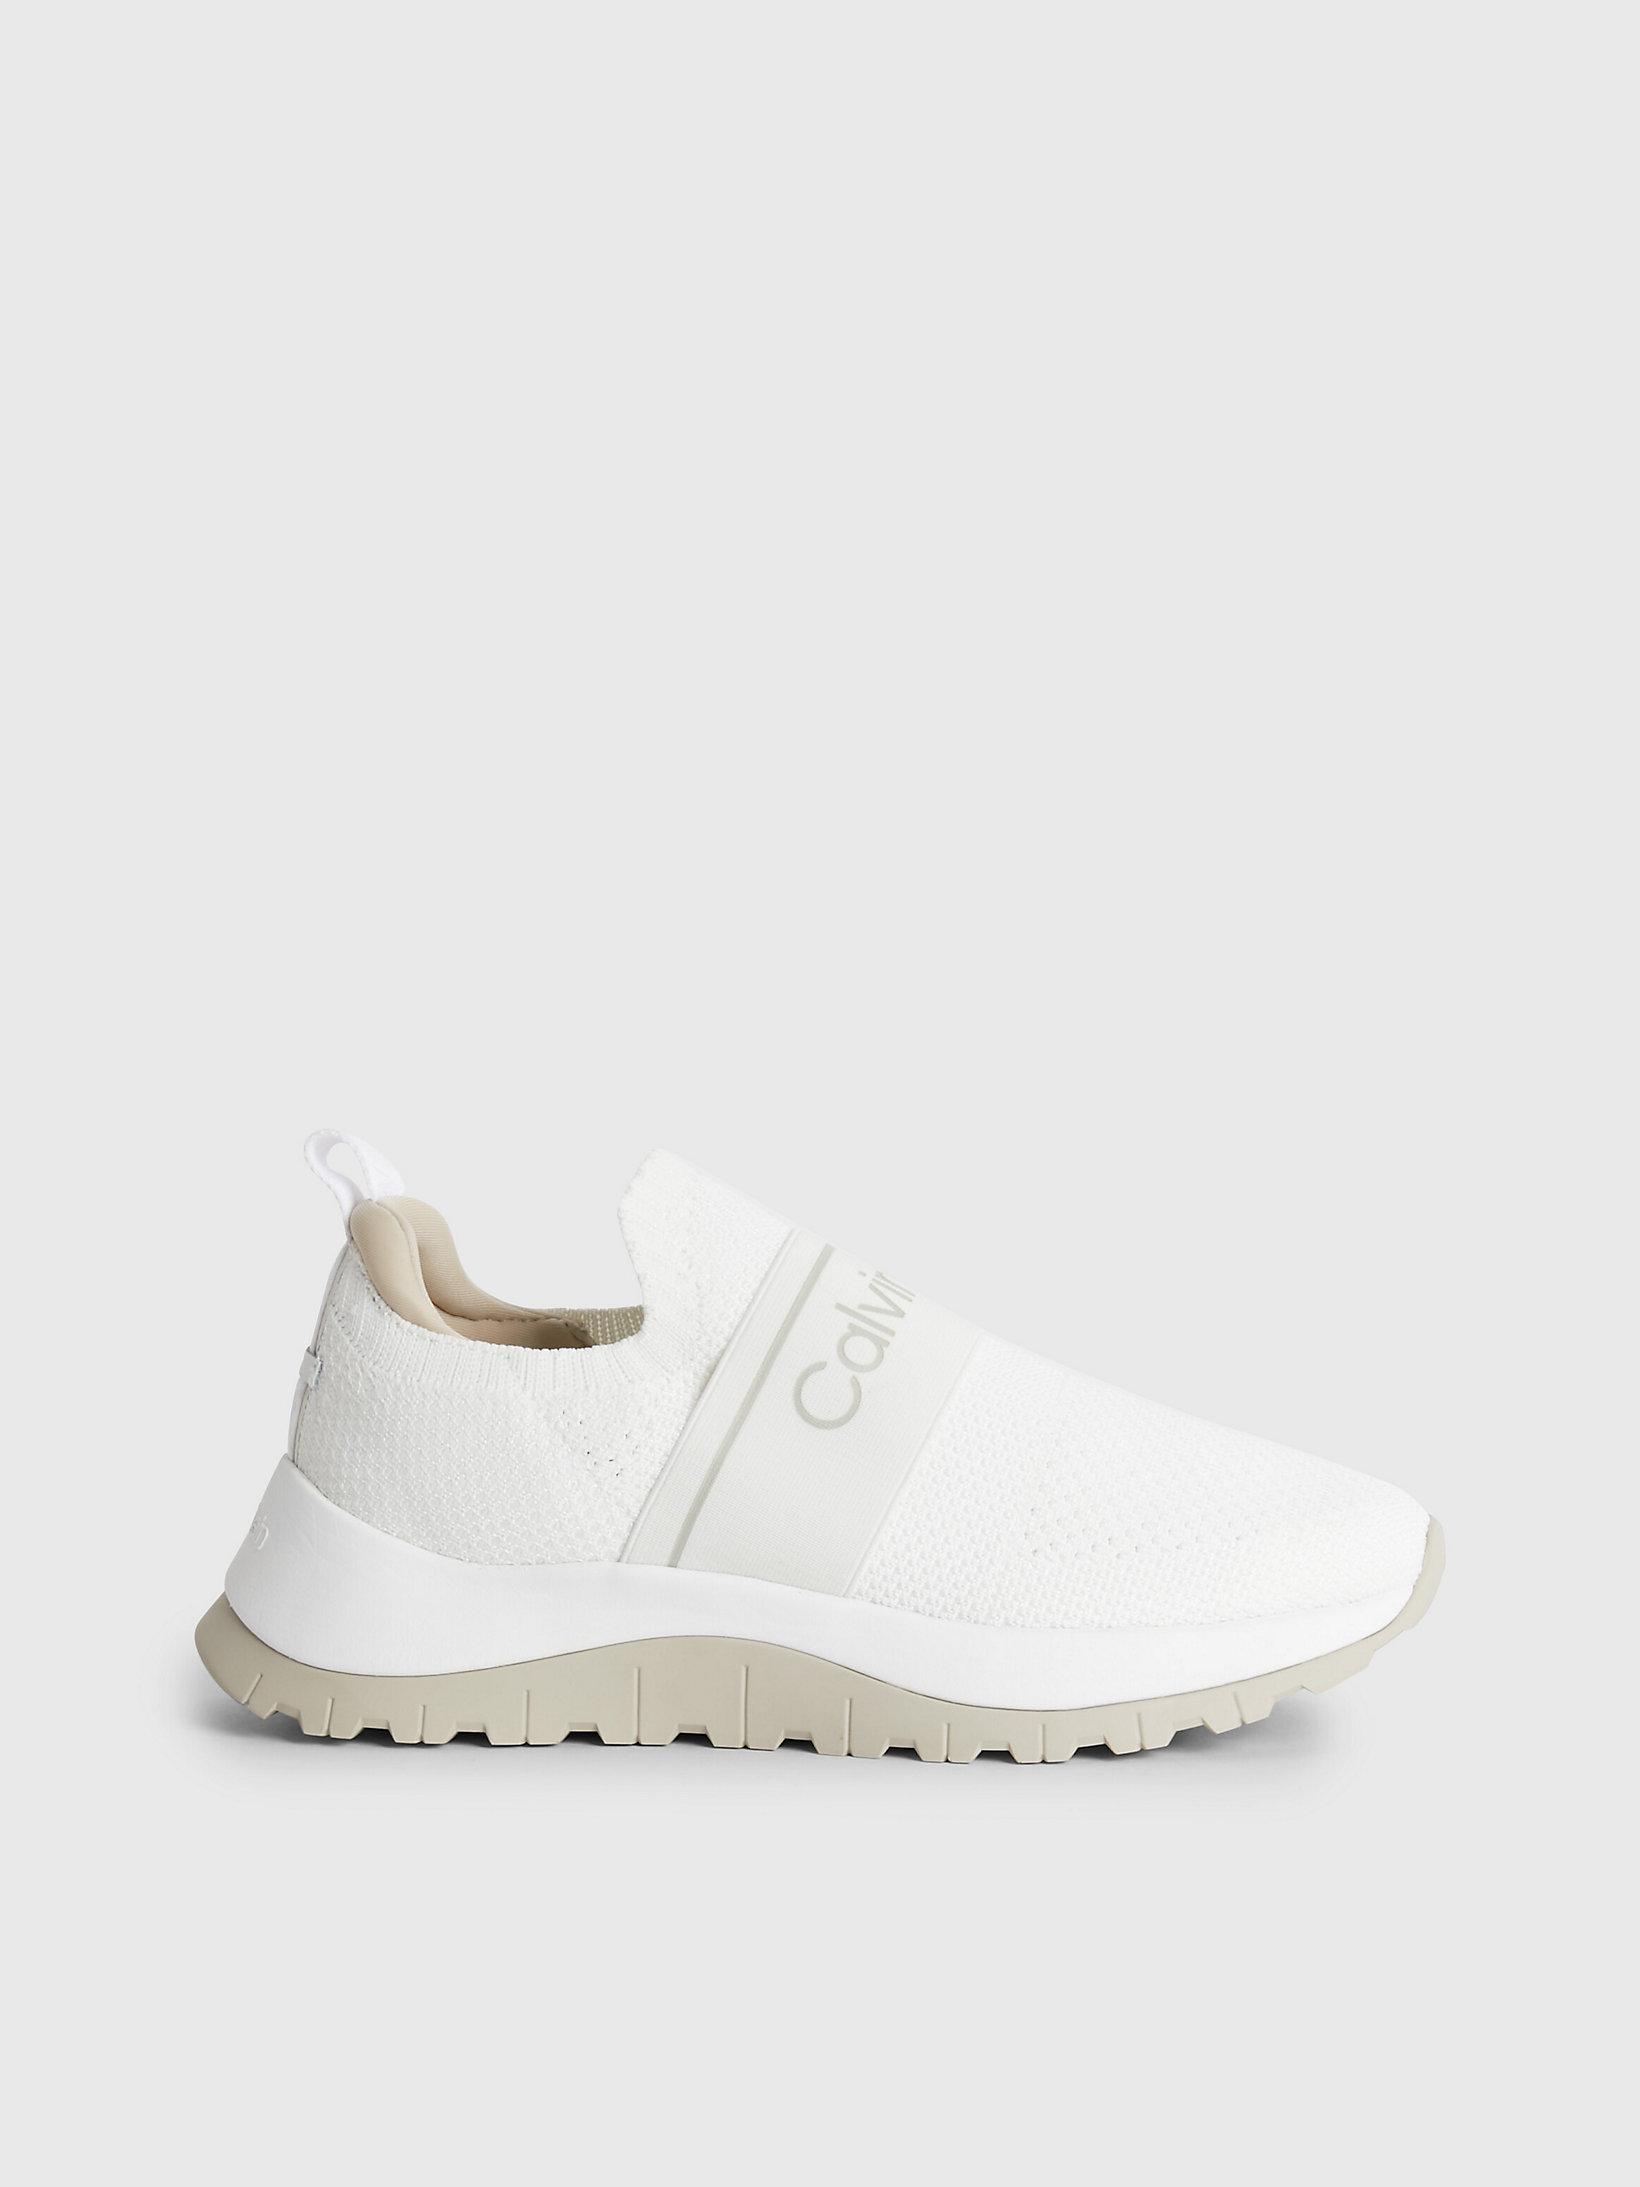 Calvin Klein Recycled Knit Slip-on Trainers in Natural | Lyst UK